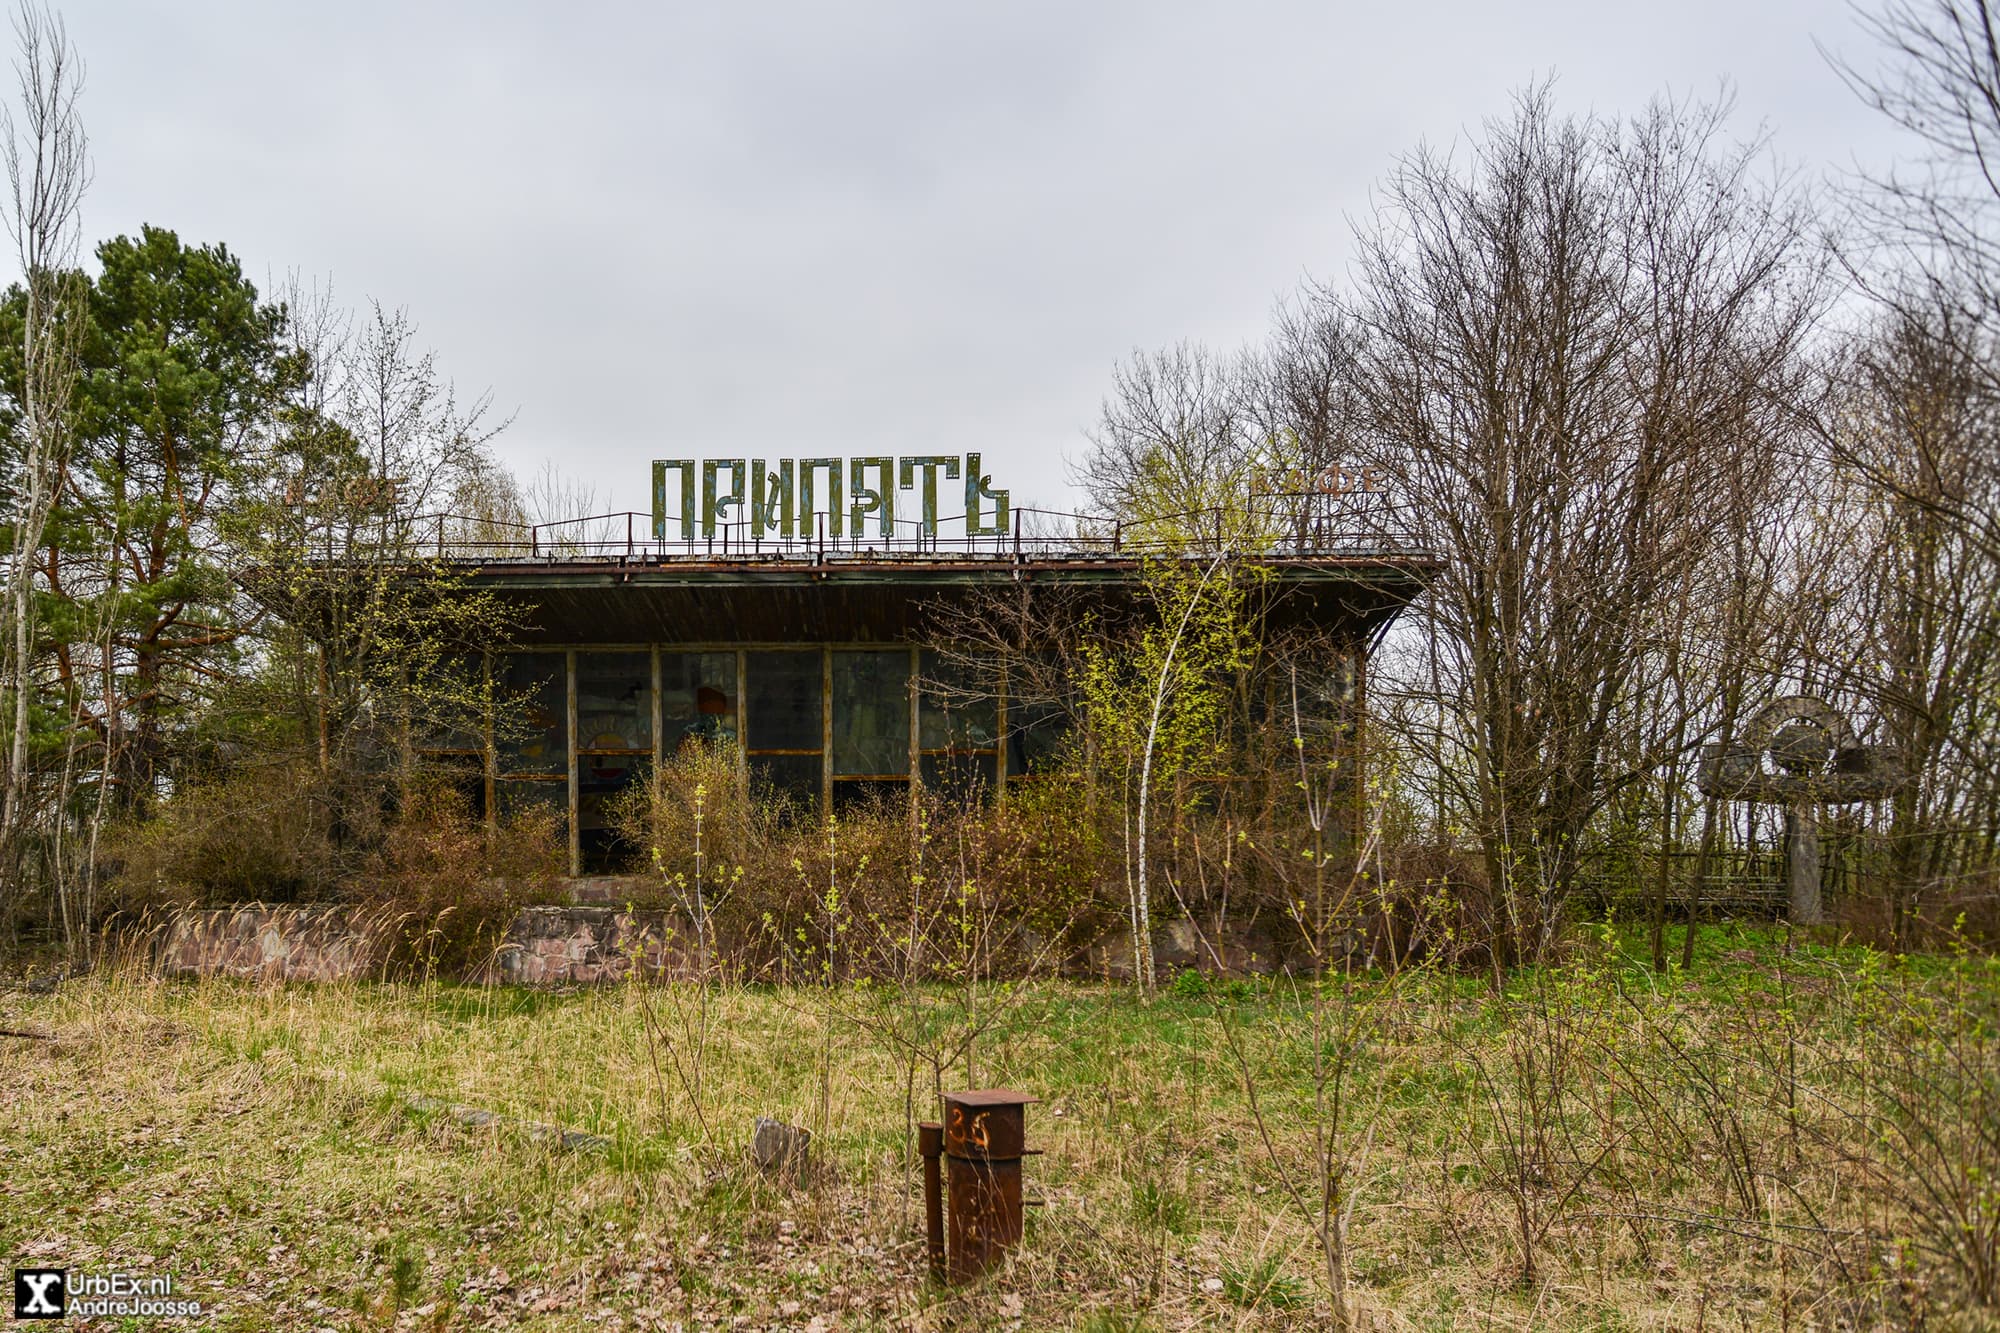 Cafe Pripyat, also called ‘The Dish’